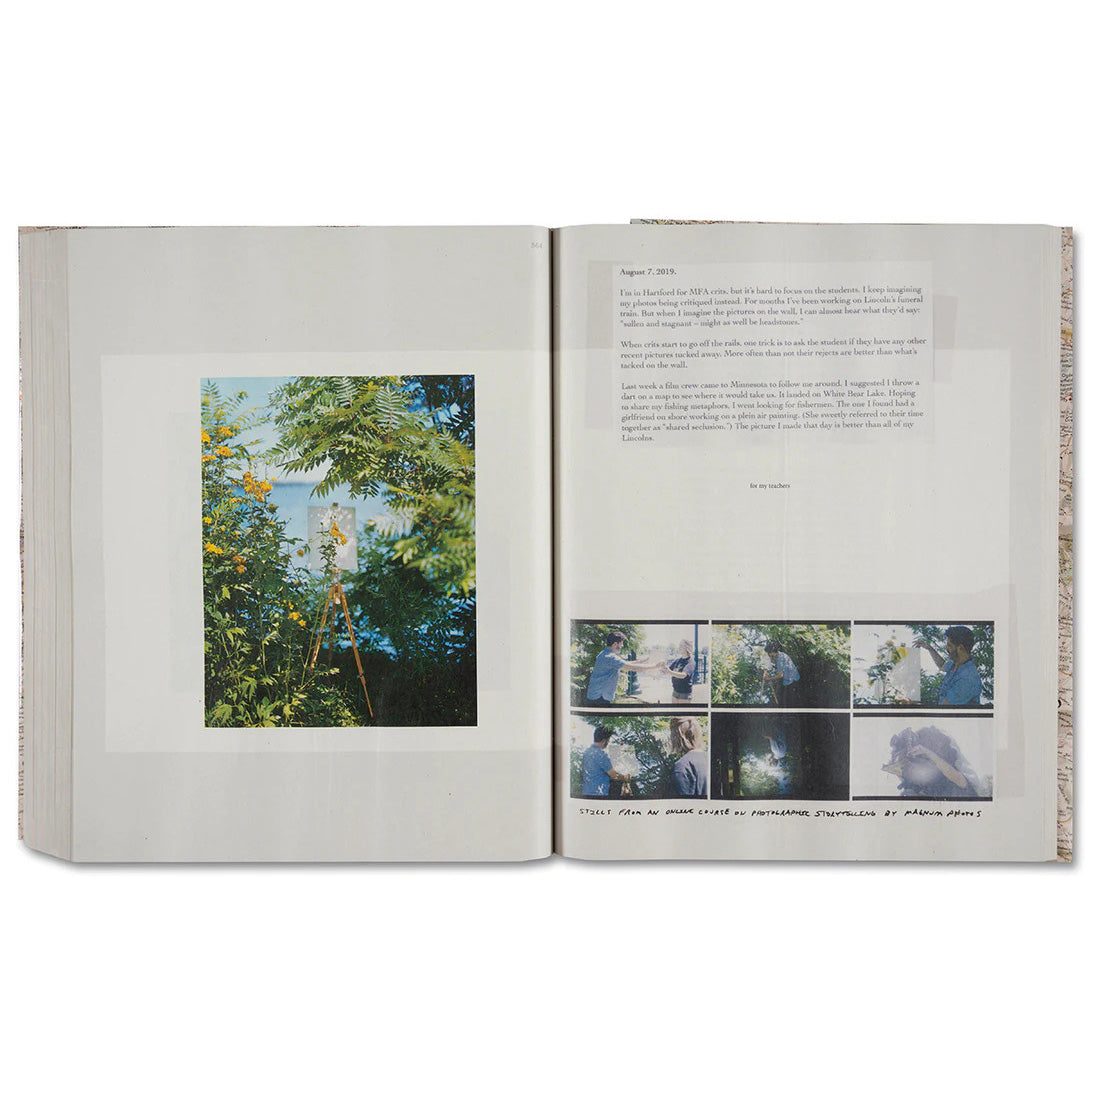 Gathered Leaves Annotated – Alec Soth